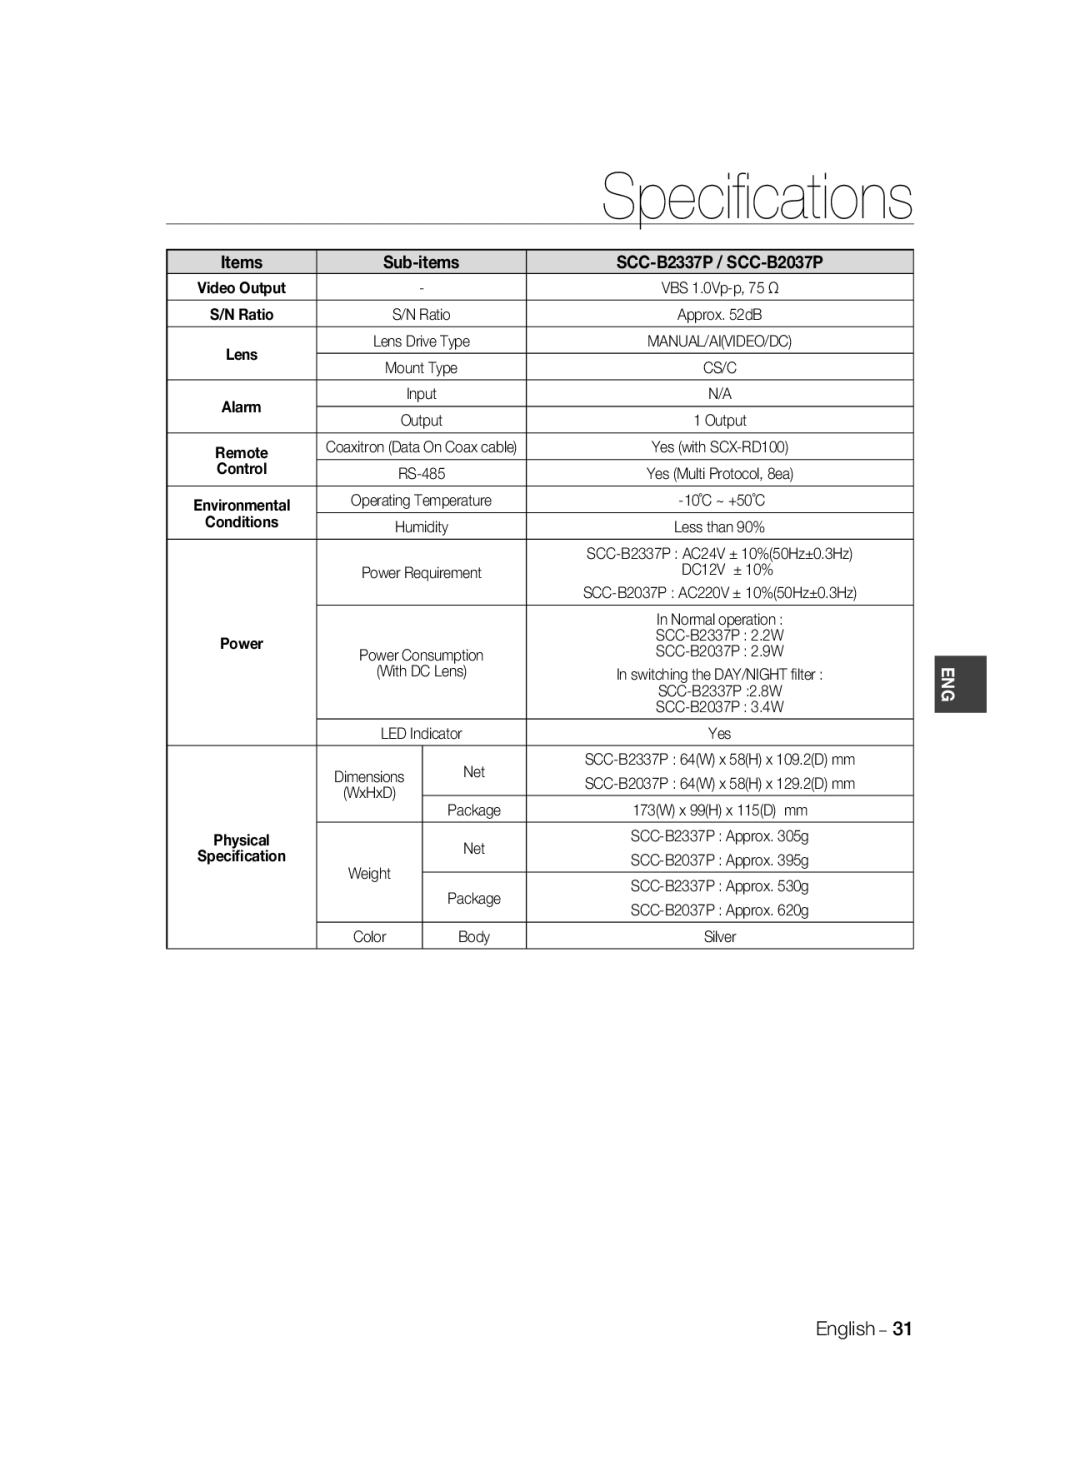 Samsung manual Speciﬁcations, Items, Sub-items, SCC-B2337P / SCC-B2037P, Control, Conditions 